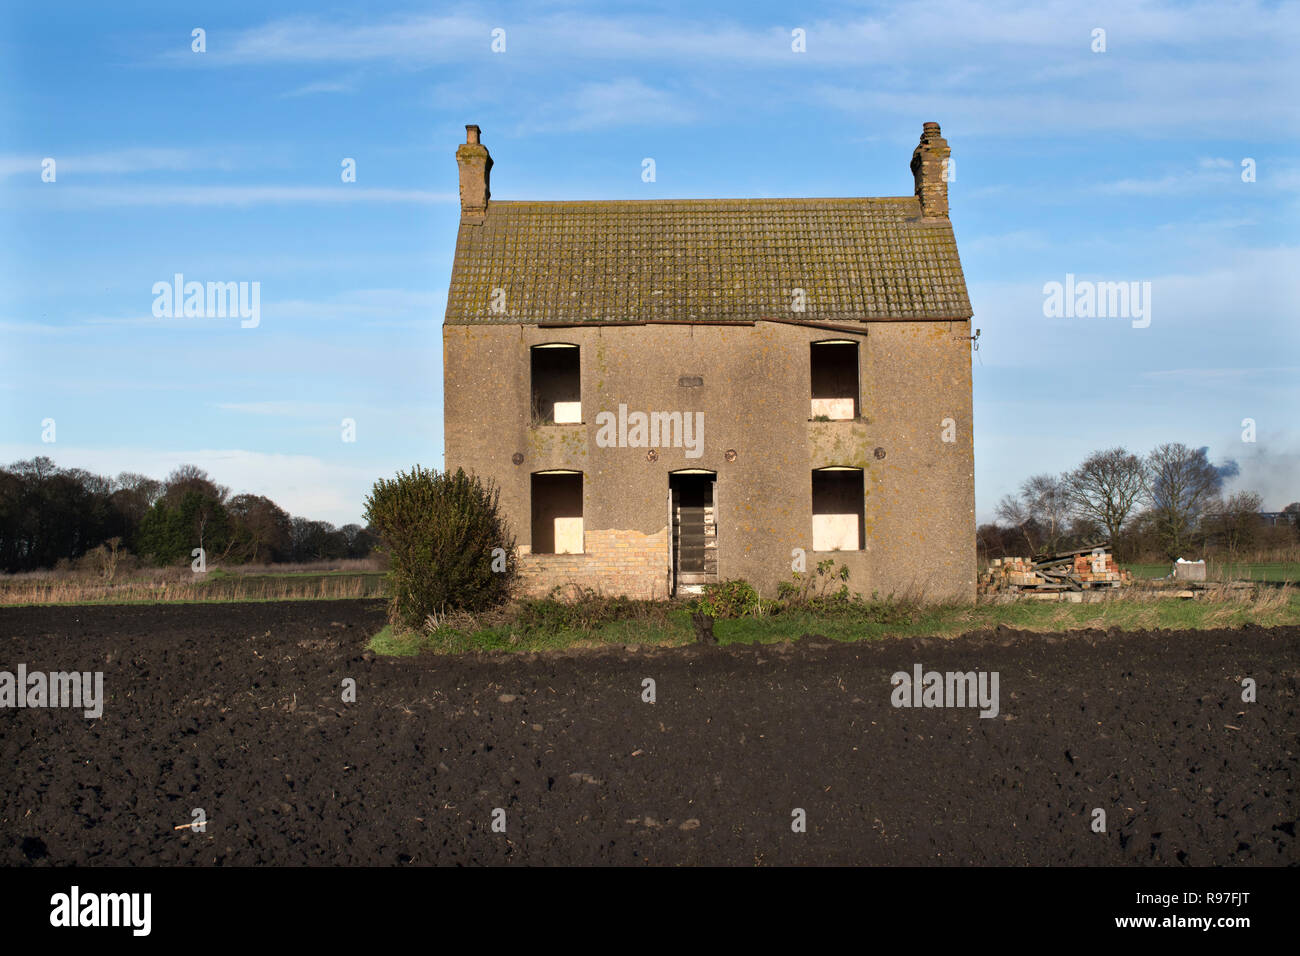 Abandoned farm house in the Fens. Rural poverty Fenlands landscape Southerly Norfolk East Angelia. England  UK 2010s 2018 HOMER SYKES Stock Photo